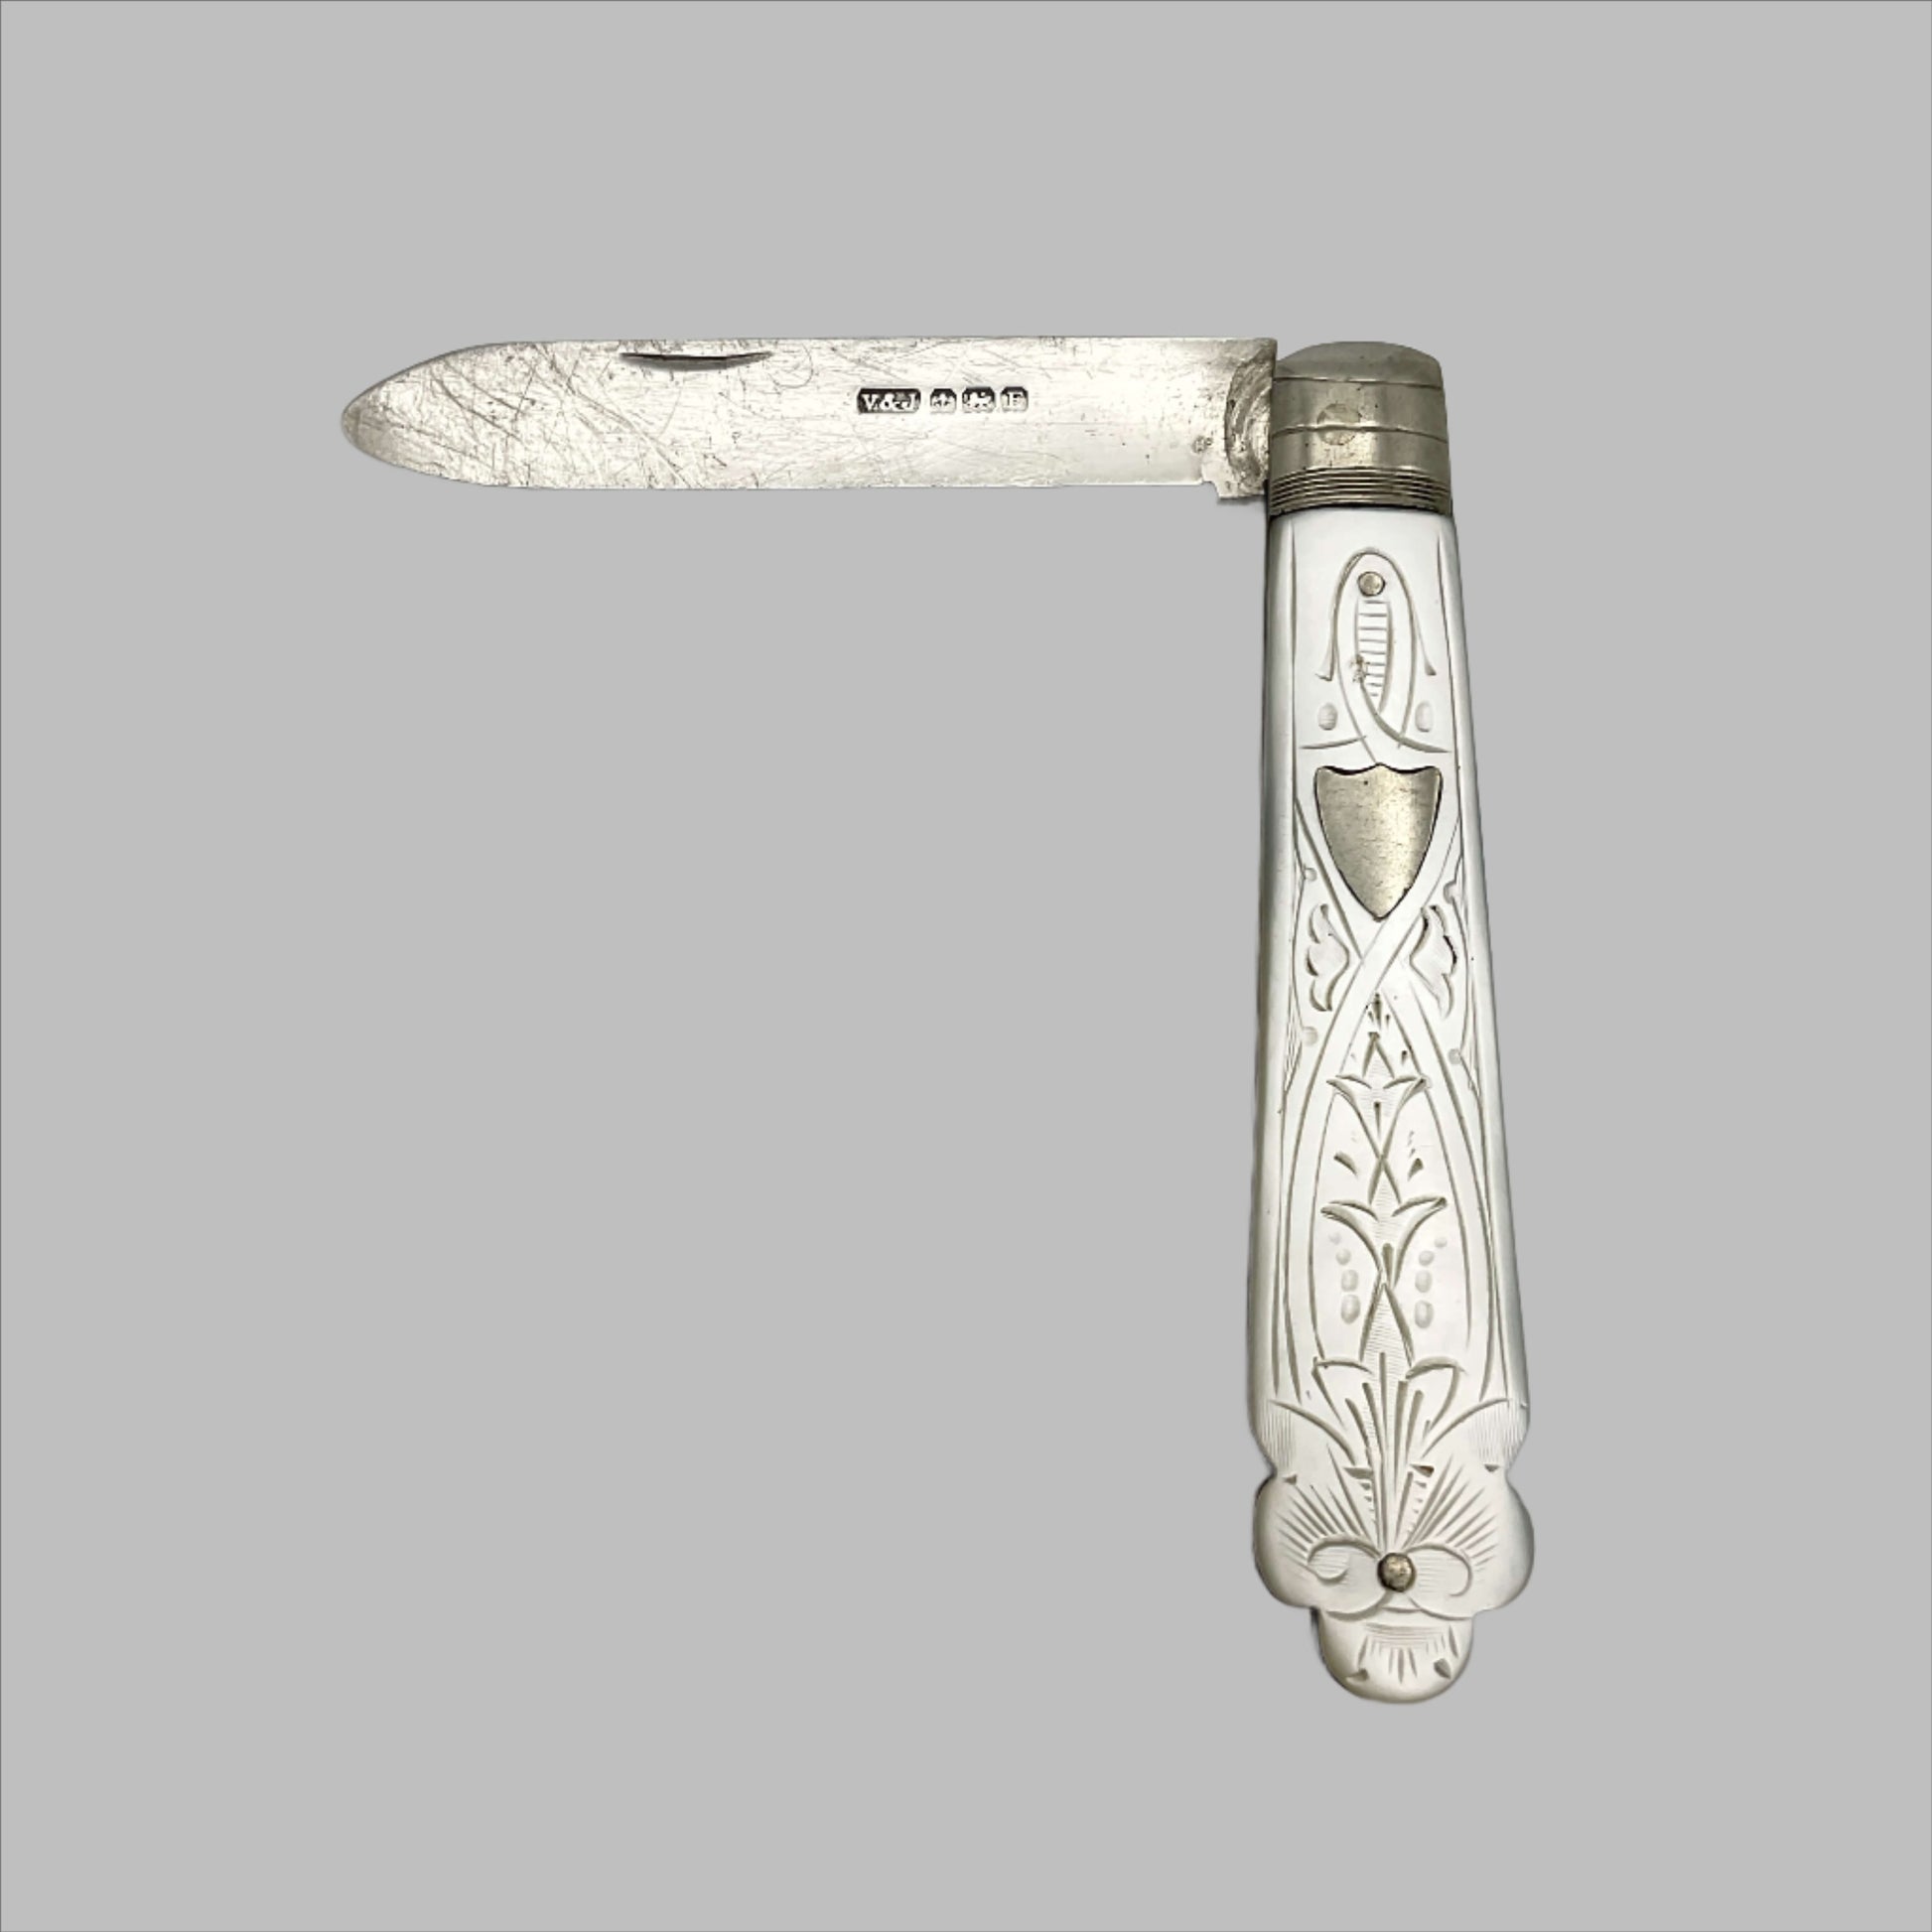 Vintage silver fruit knife with a beautifully engraved mother of pearl handle